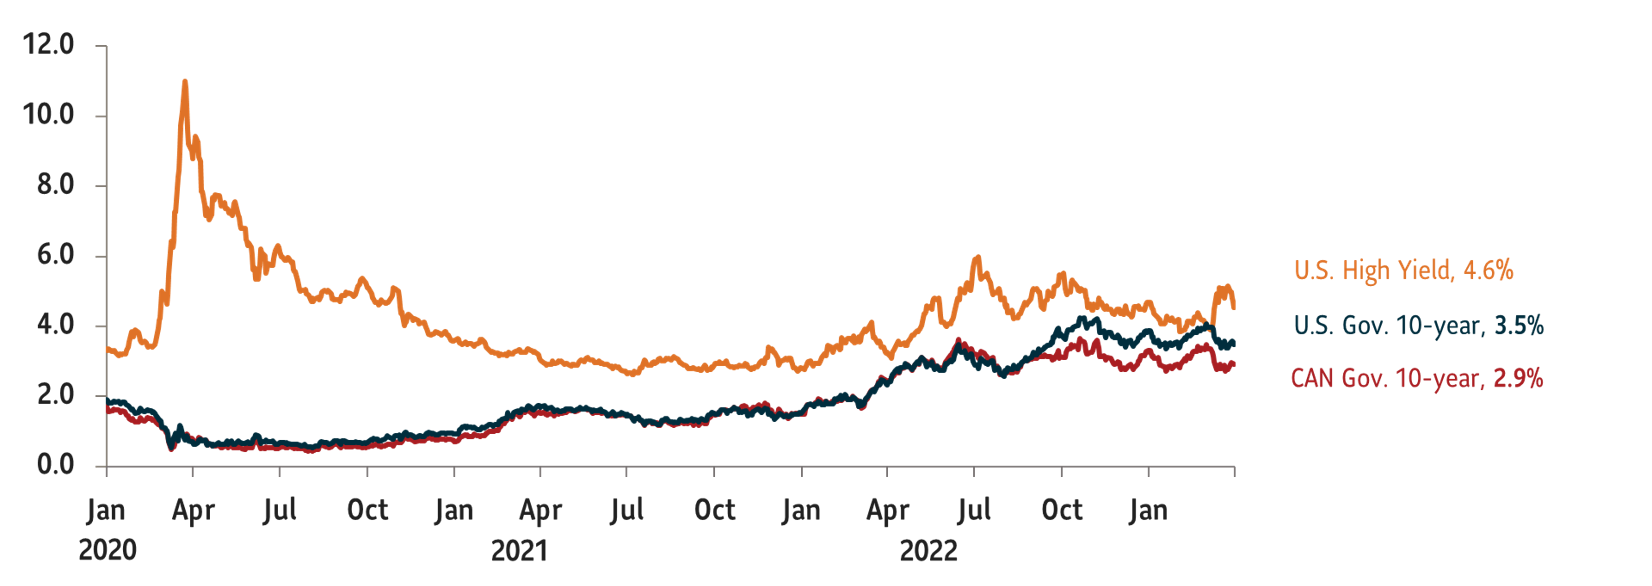 Chart shows bond yields since January 2020 for the U.S. 10-year, the U.S. High Yield, and the Canada 10-year